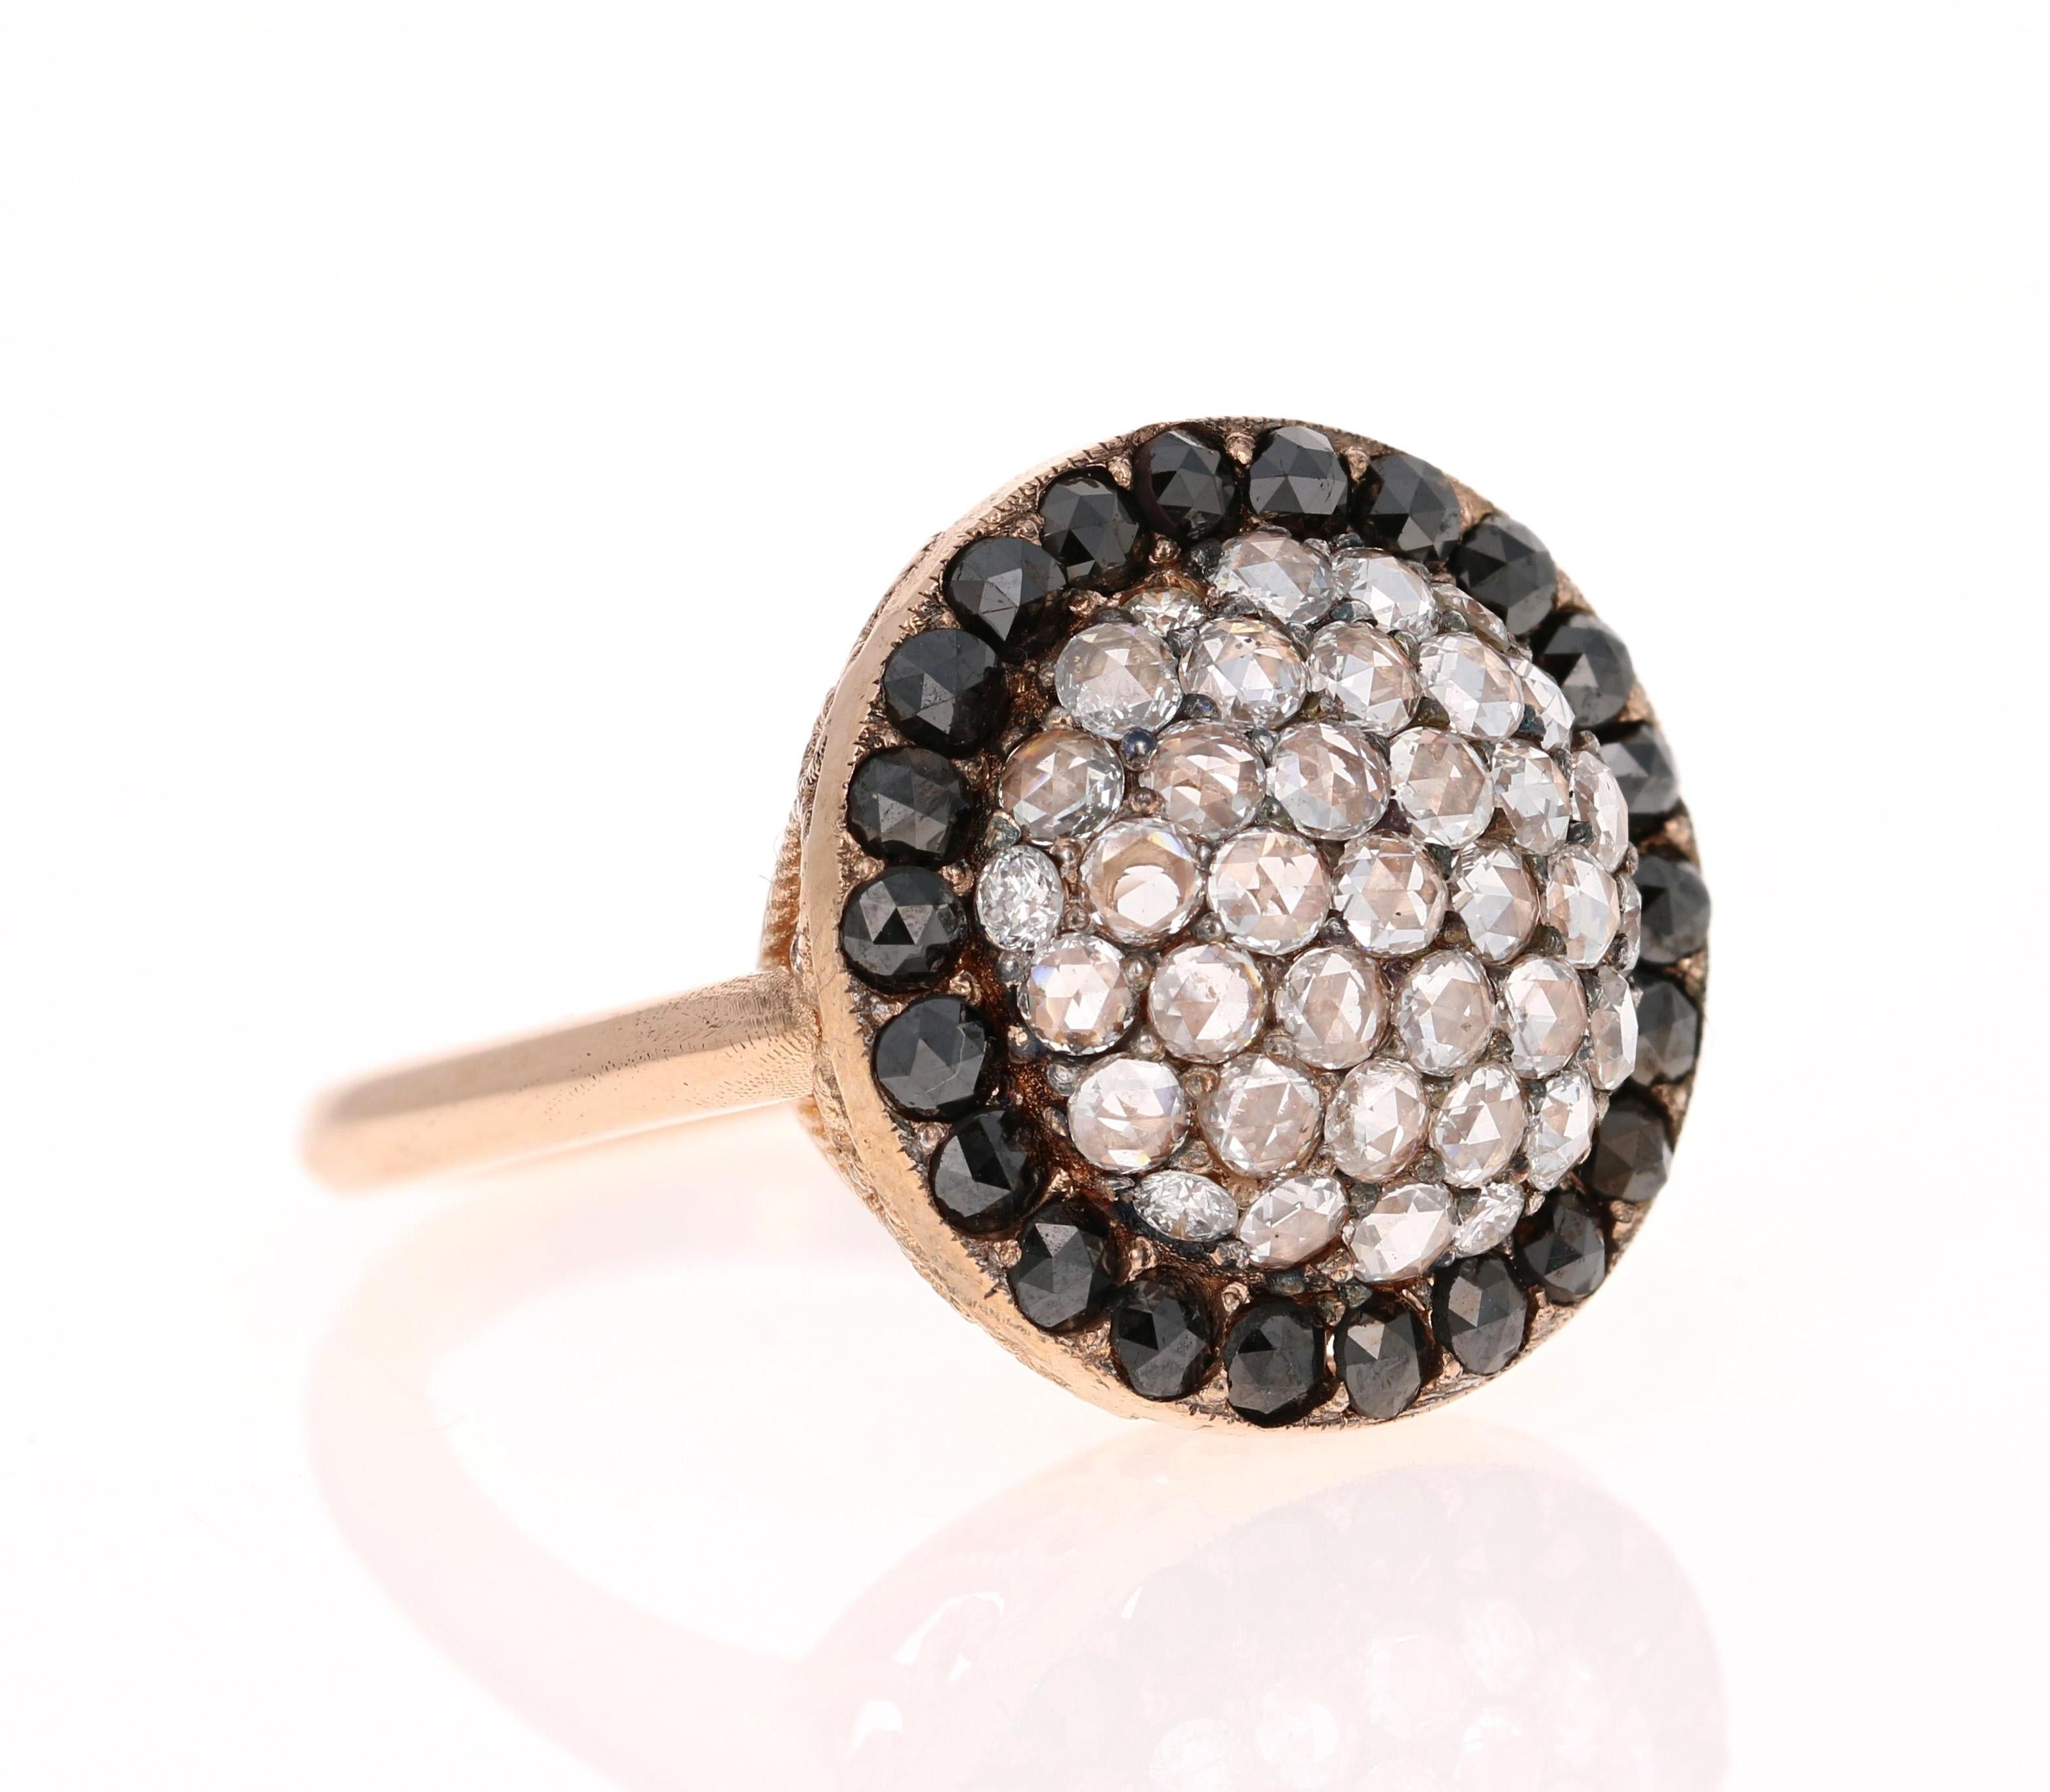 This ring has a beautiful cluster of 38 Rose Cut Diamonds that weigh 0.58 Carats and 22 Black Round Cut Diamonds that weigh 0.97 carats. The total carat weight of the ring is 1.55 carats. 

The ring is made in 18 Karat Rose Gold and weighs